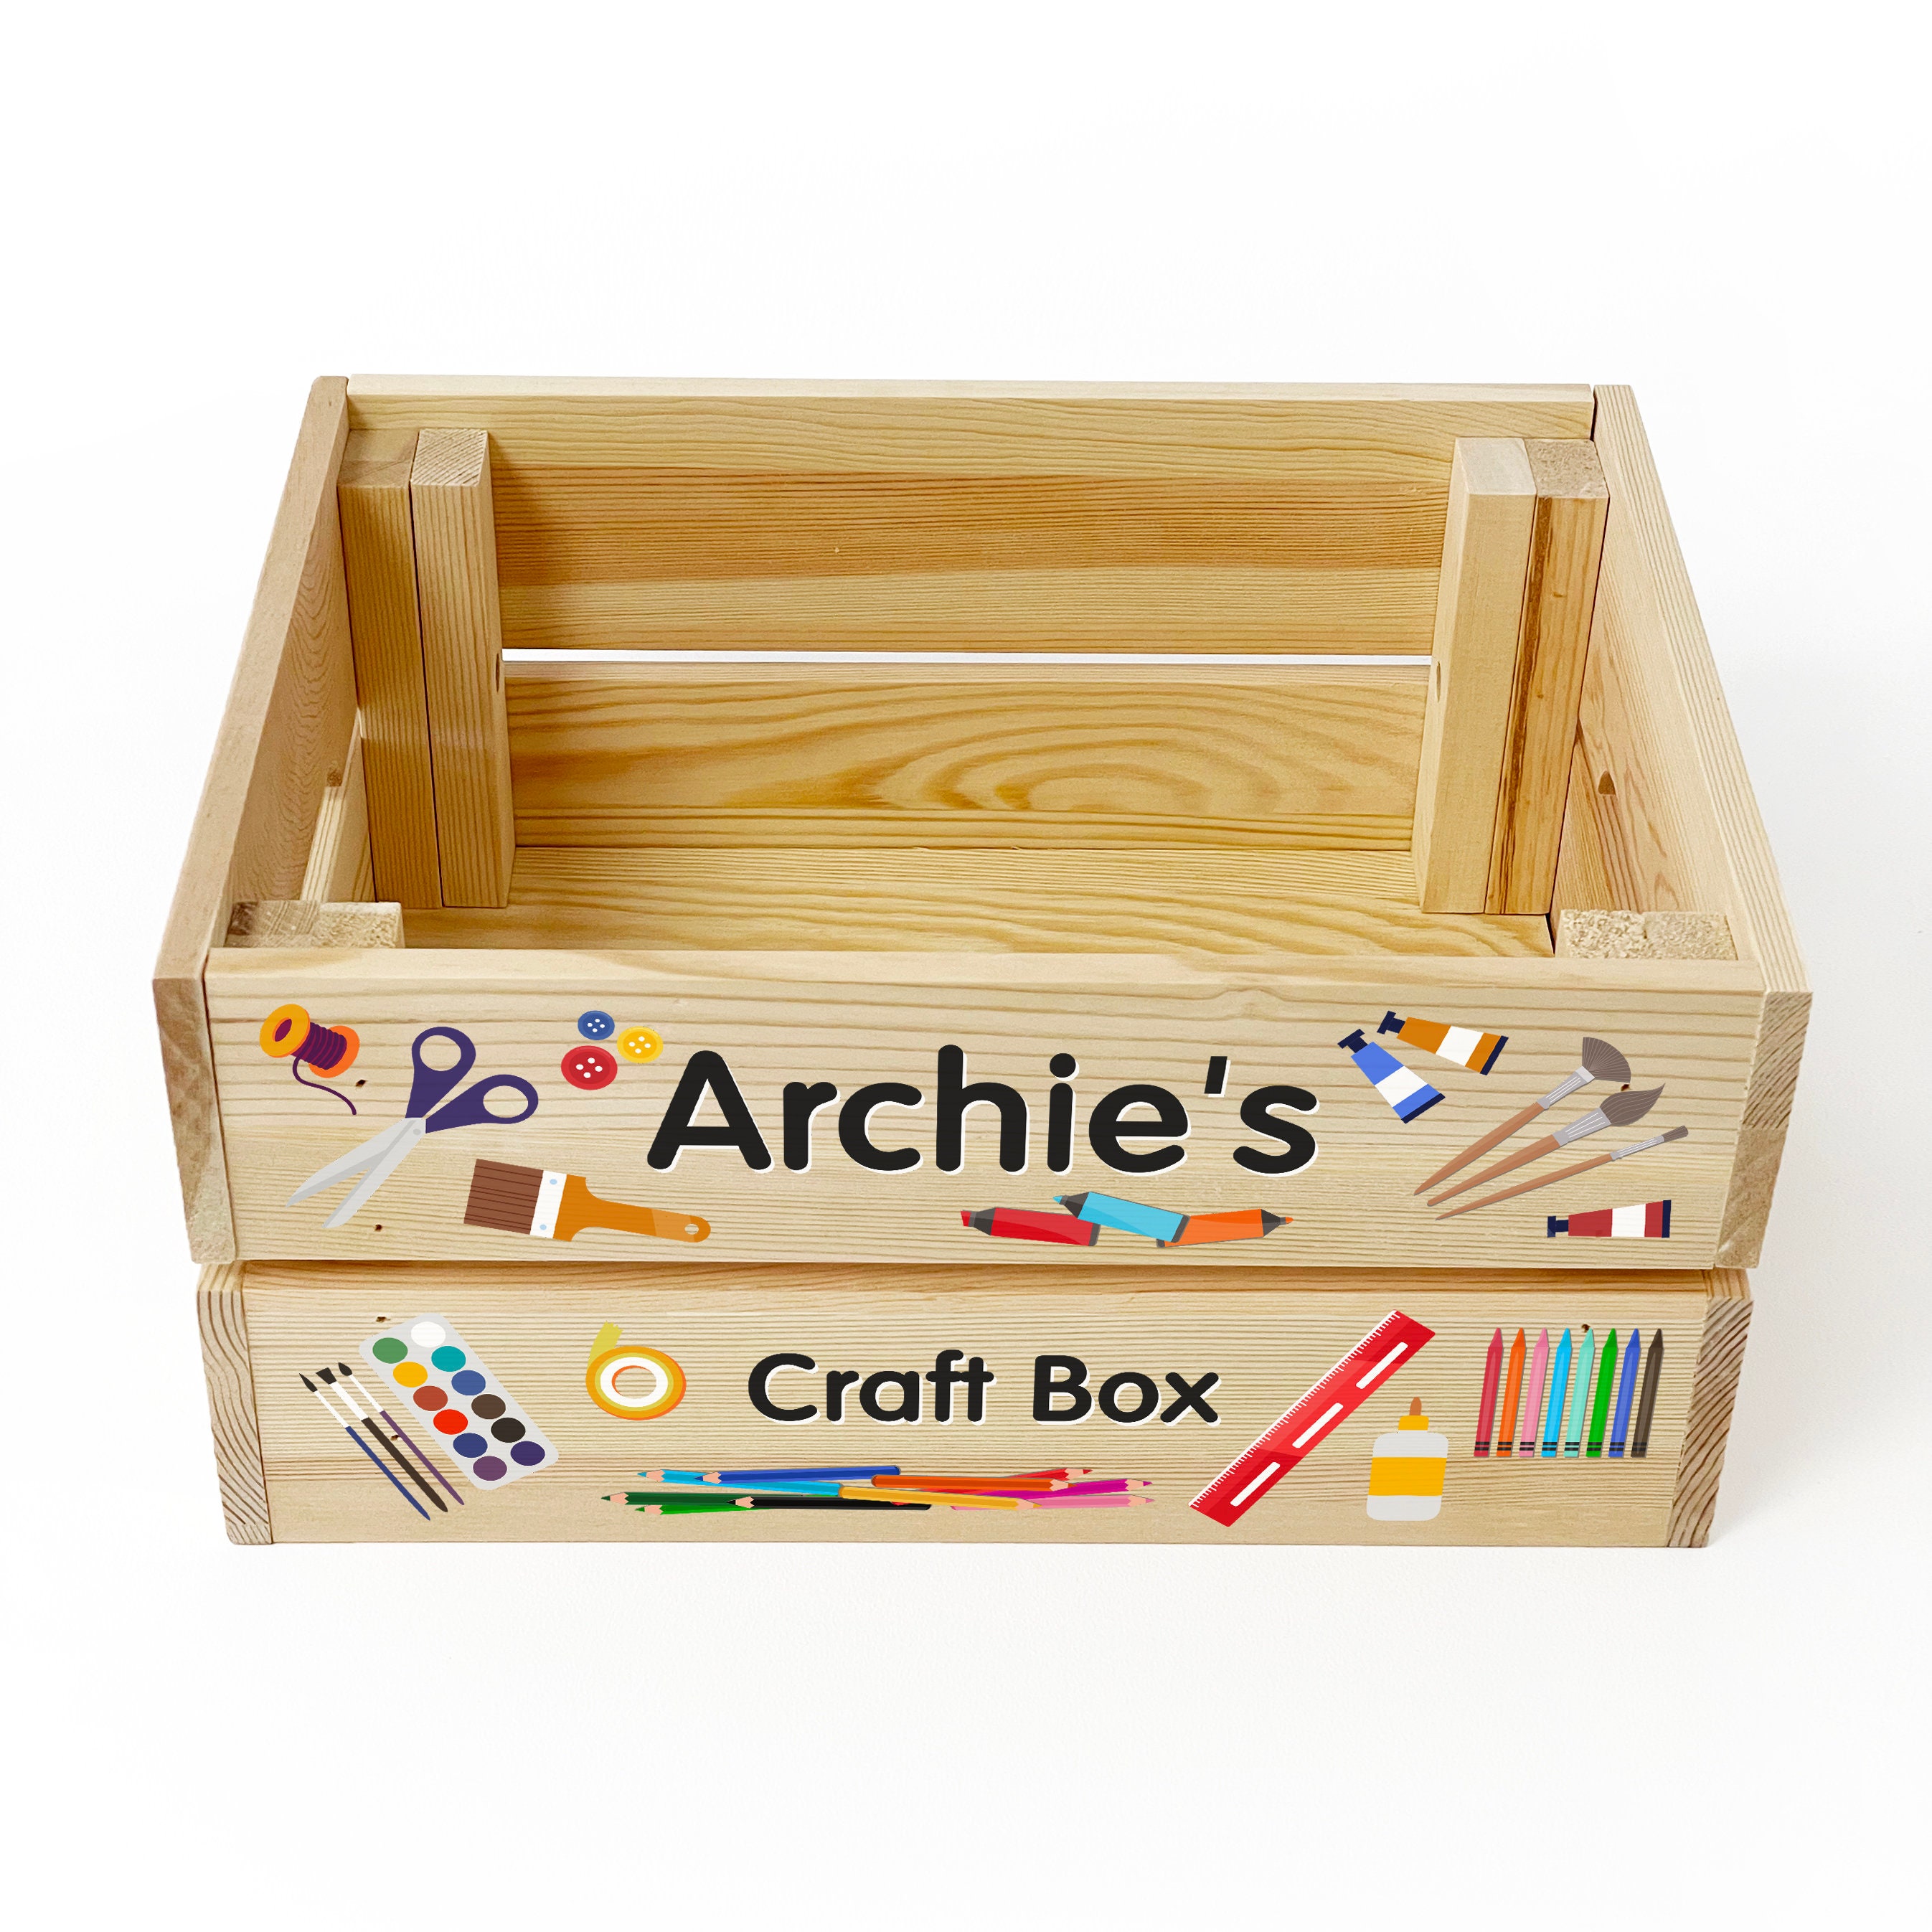 Arts and Crafts Box Personalised Art Box Wooden Arts and Crafts